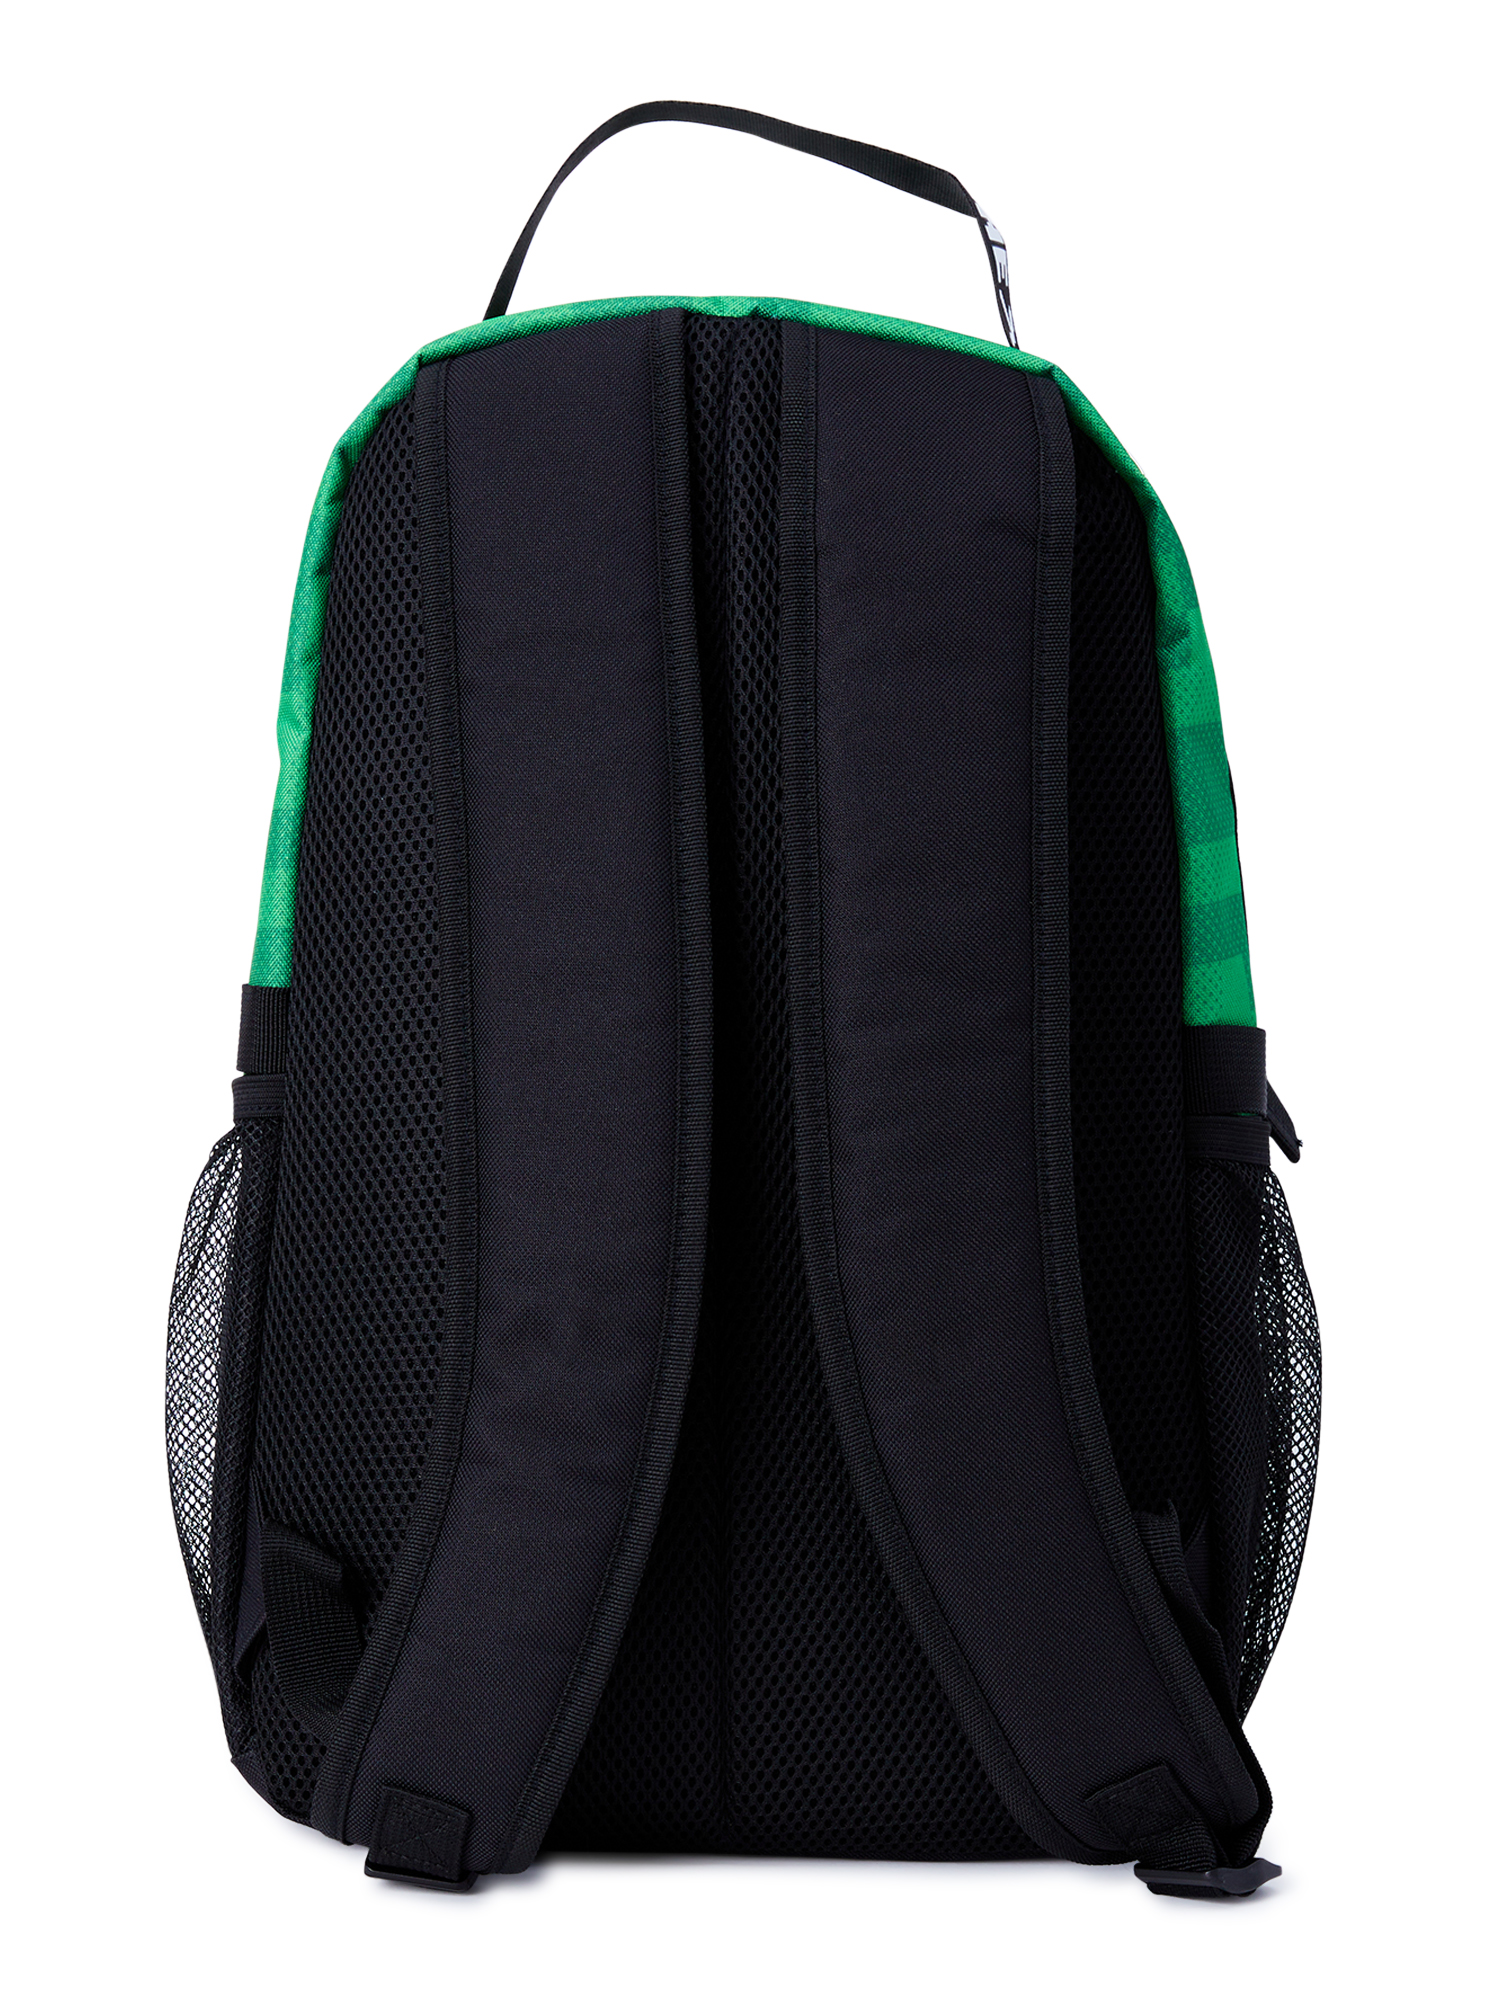 Minecraft Pickaxe Creeper Unisex 18" Laptop Backpack, Green Black - image 2 of 5